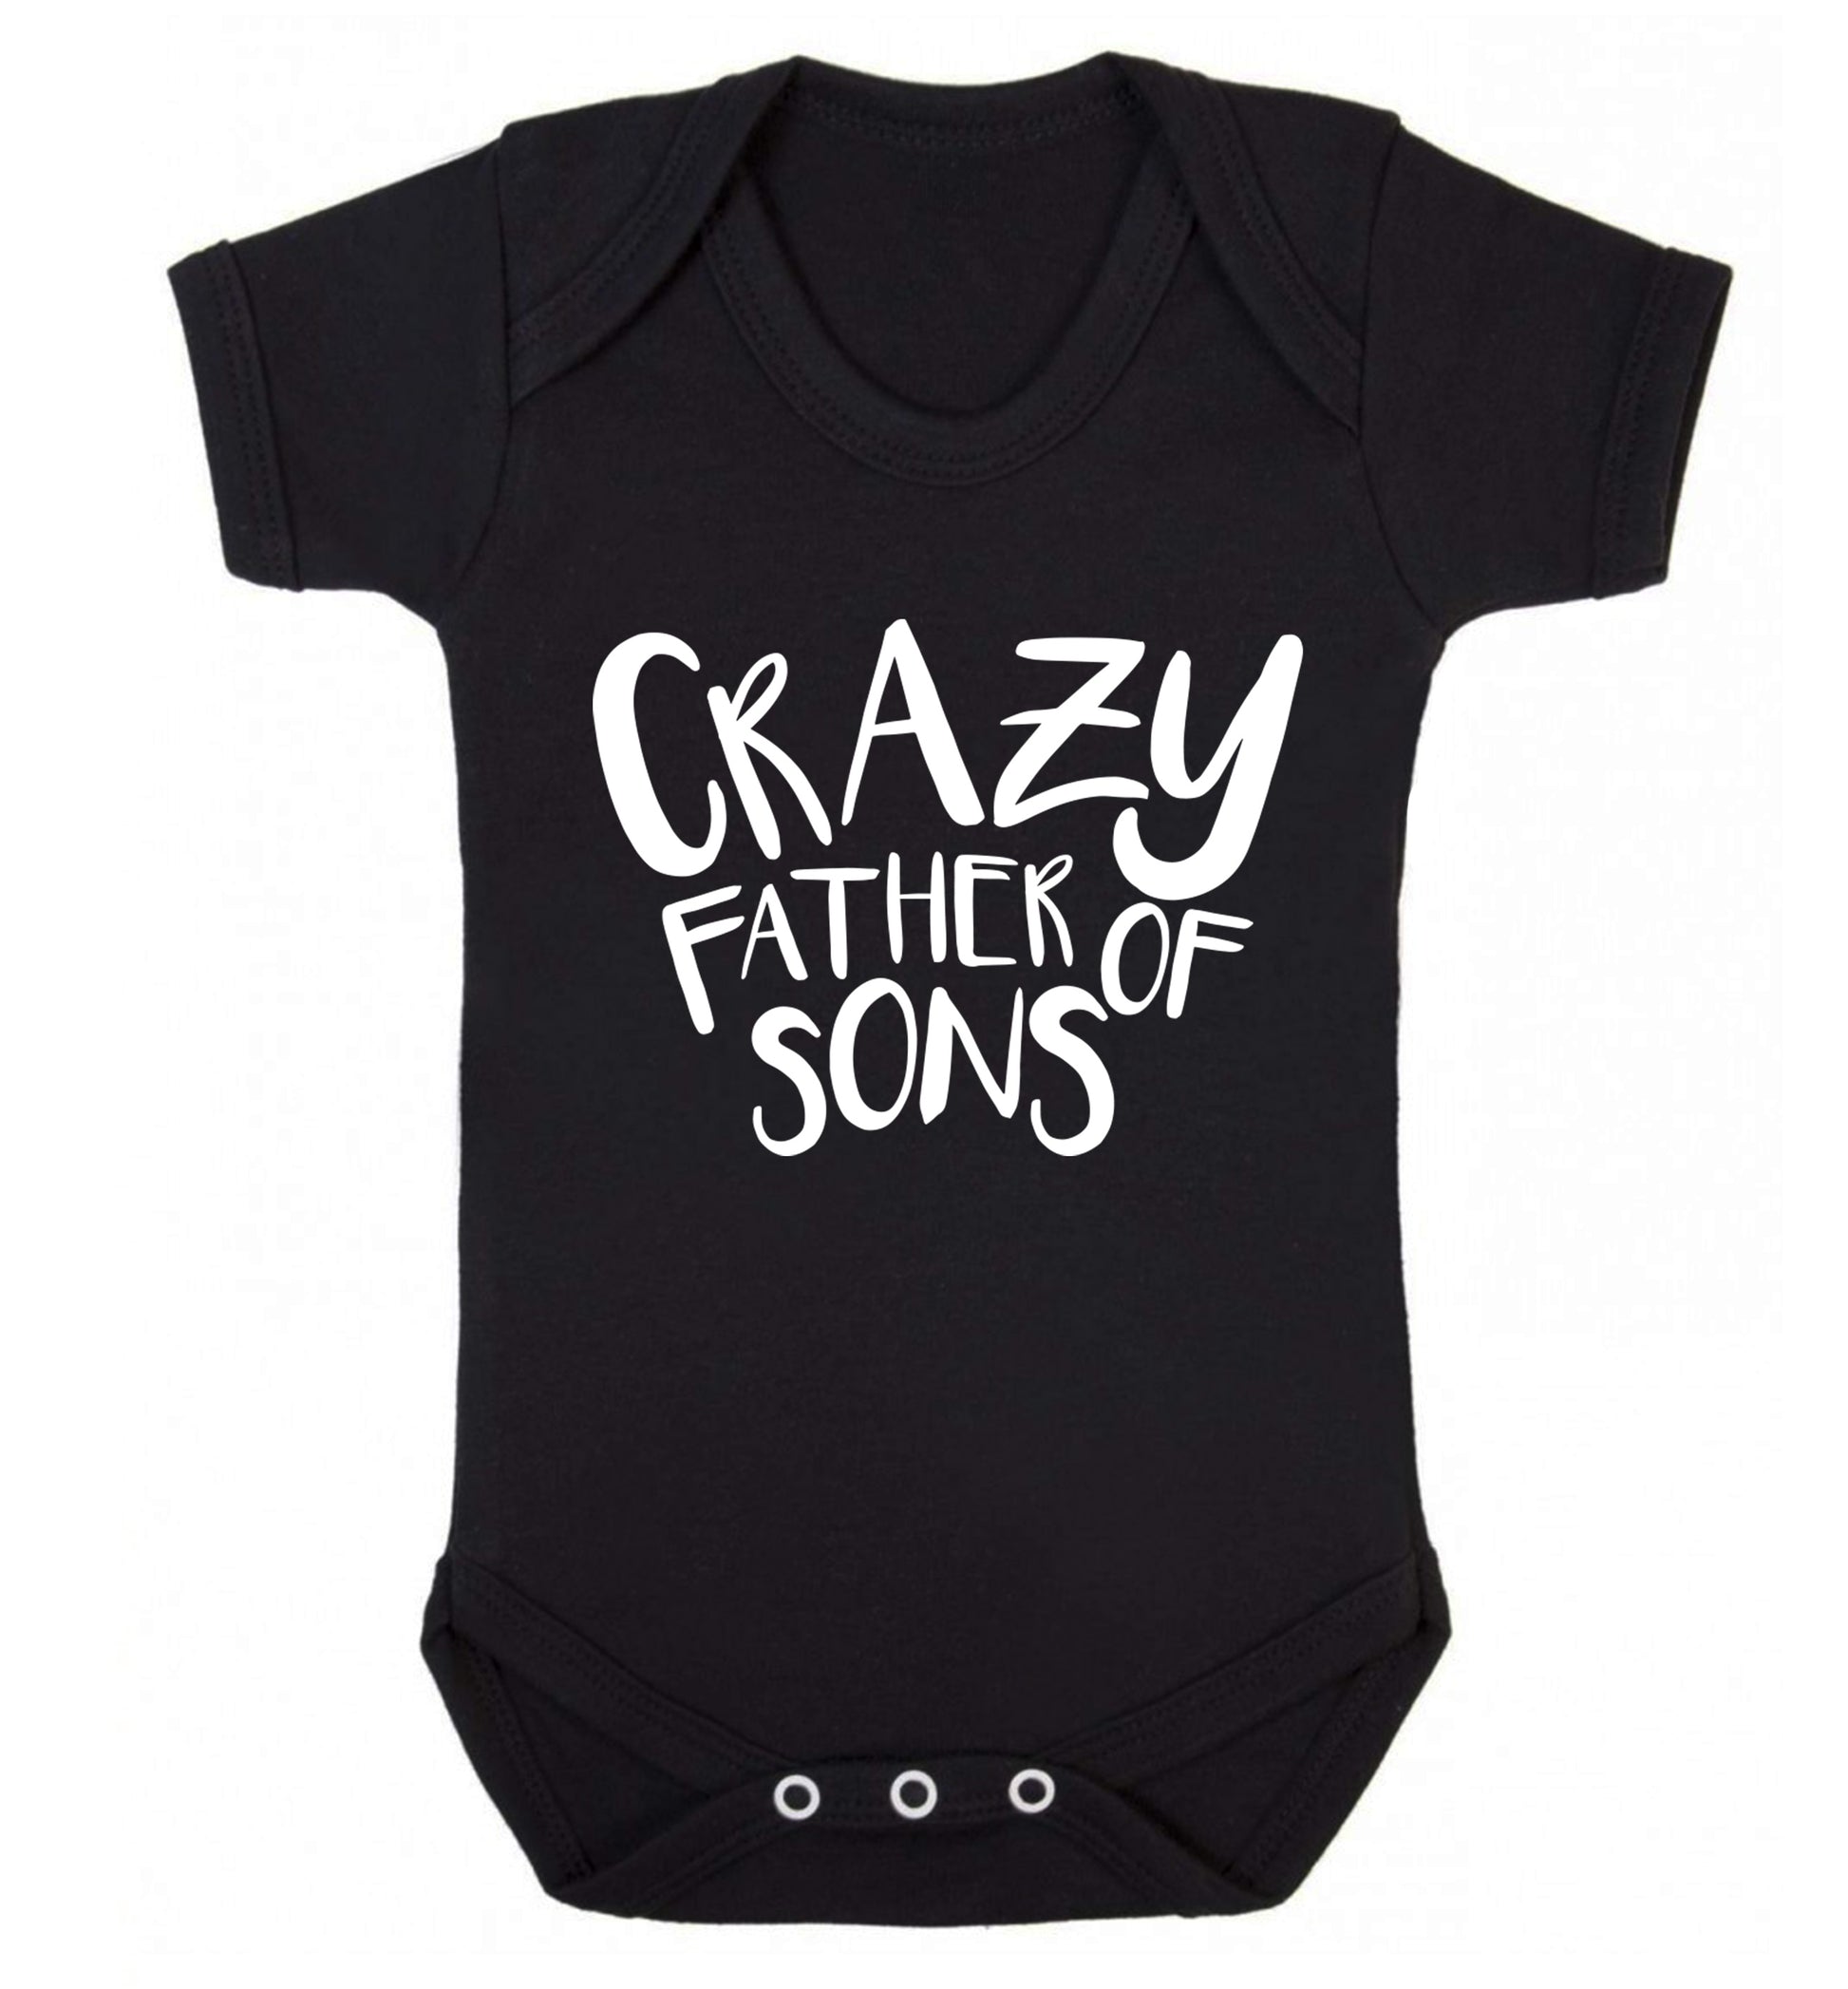 Crazy father of sons Baby Vest black 18-24 months